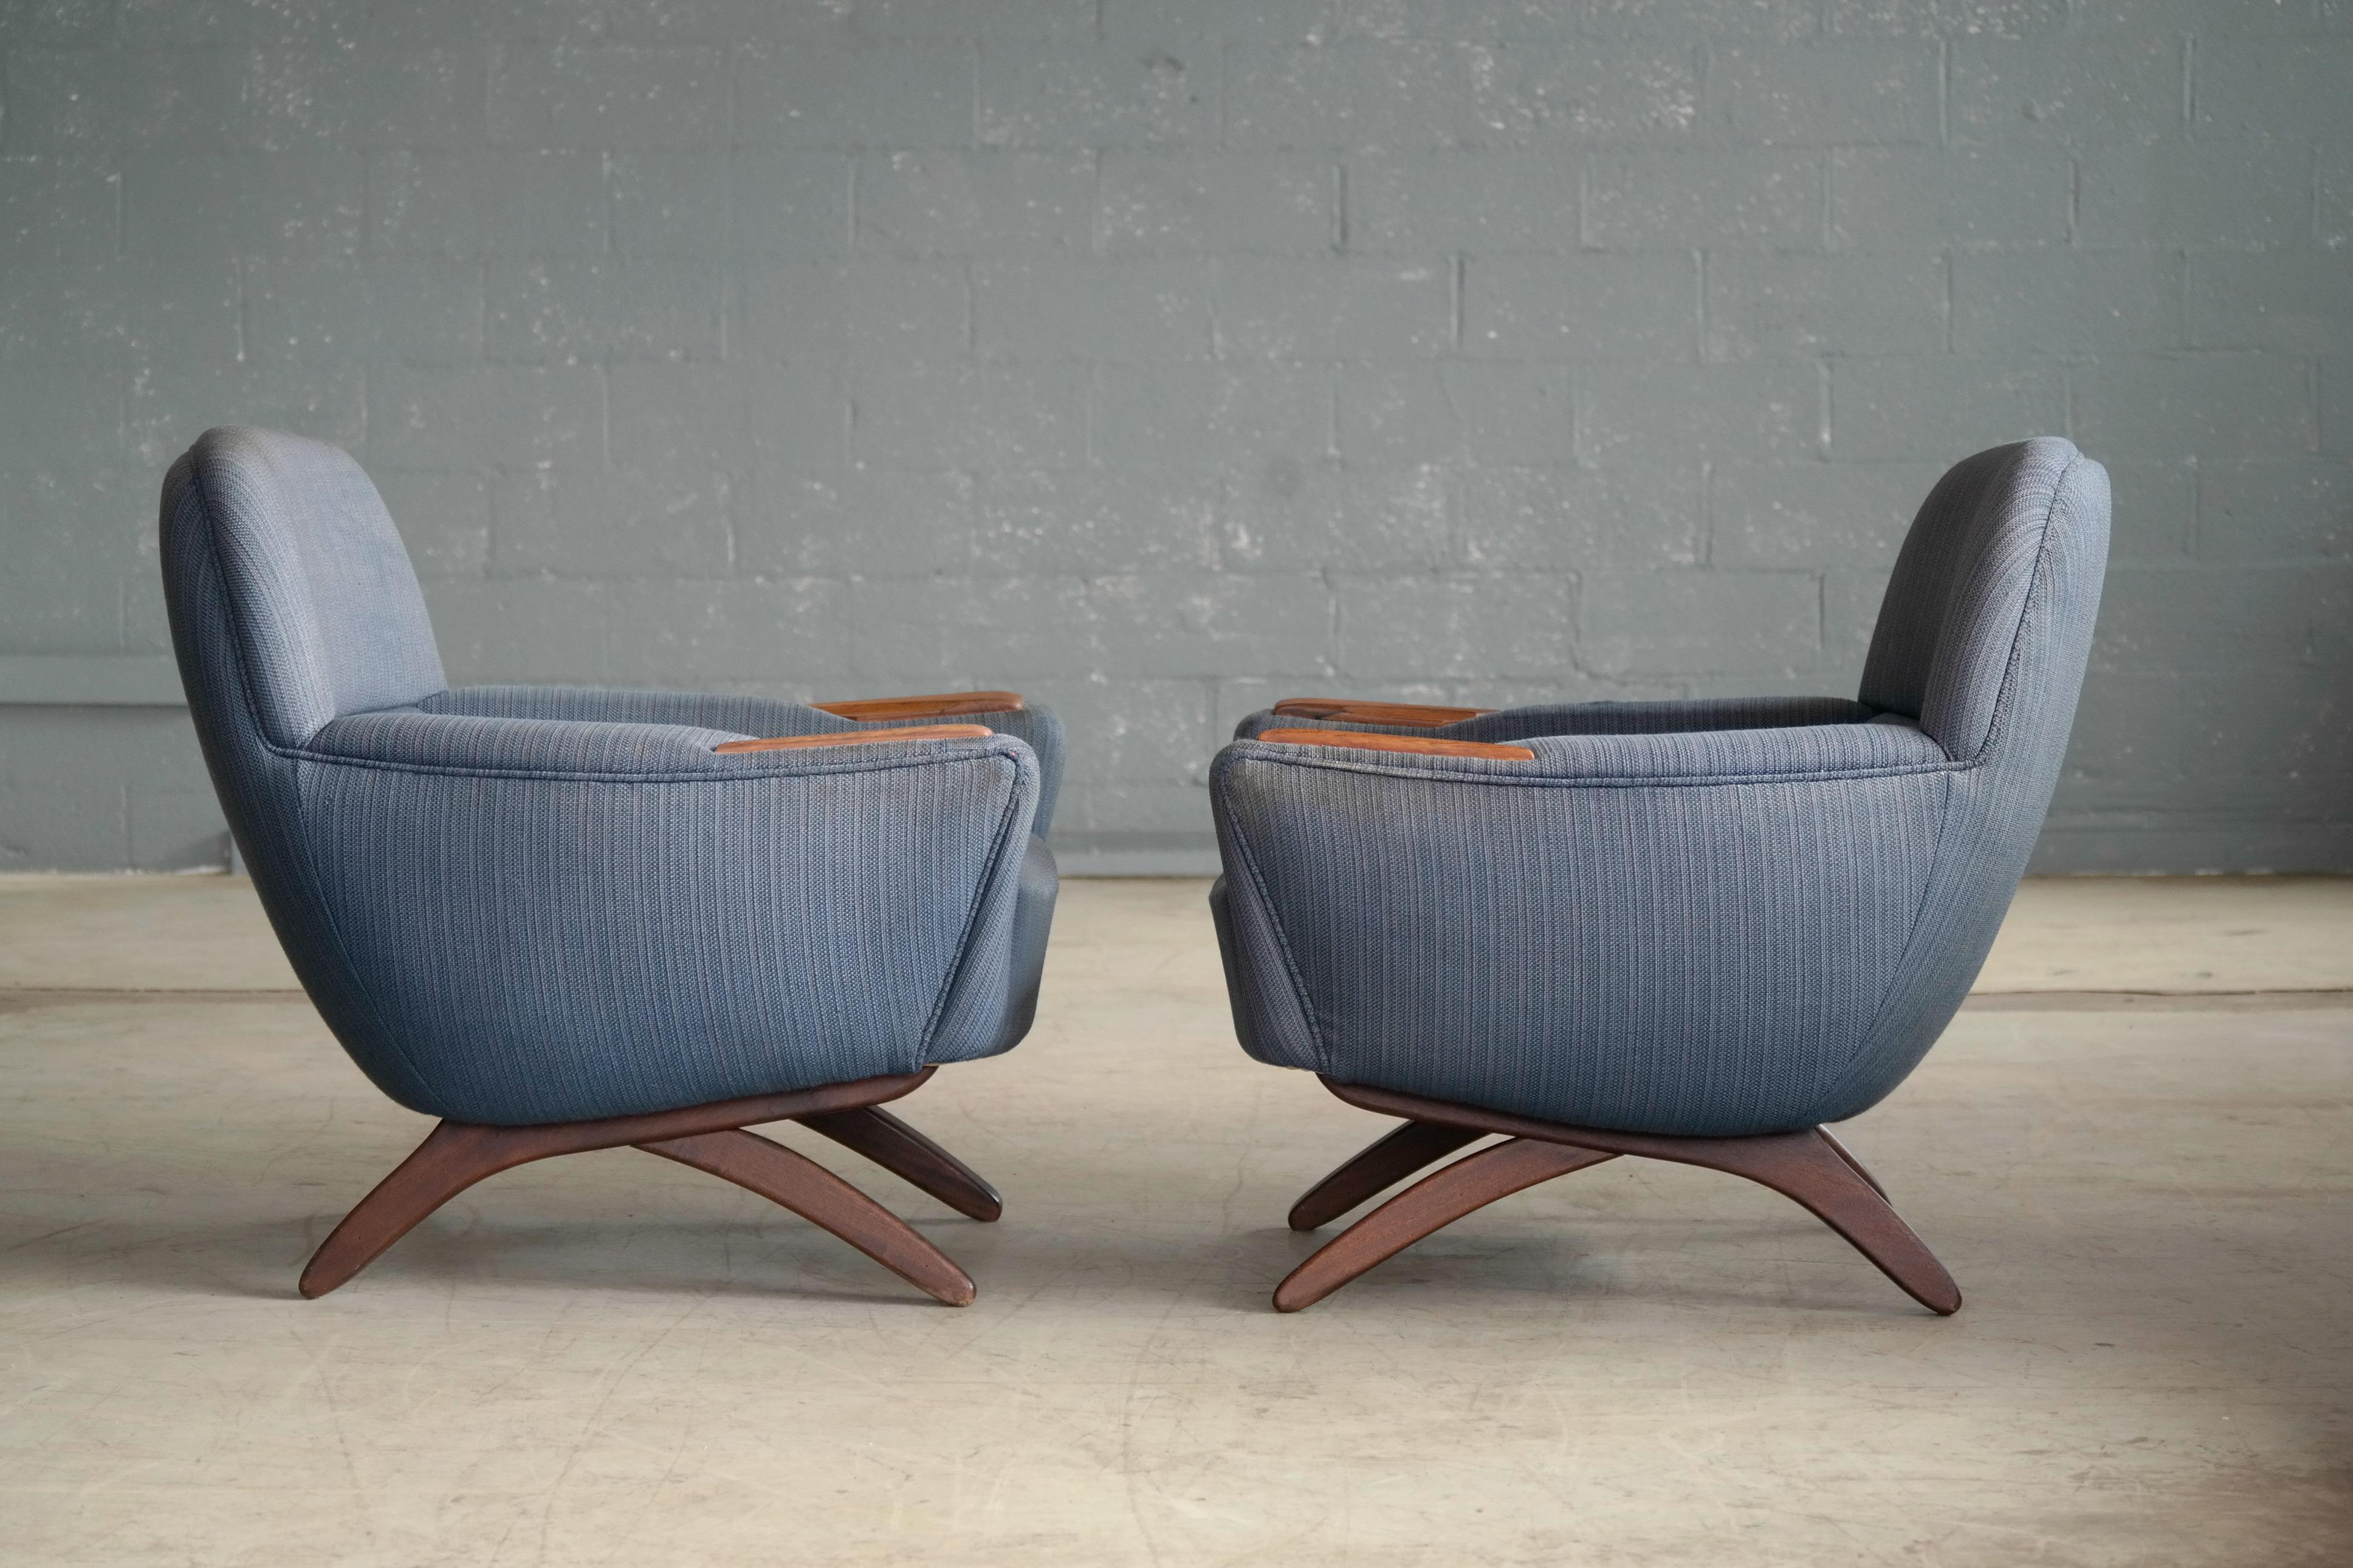 Two Danish Midcentury Leif Hansen Model Geisha Lounge Chairs with Rosewood 2